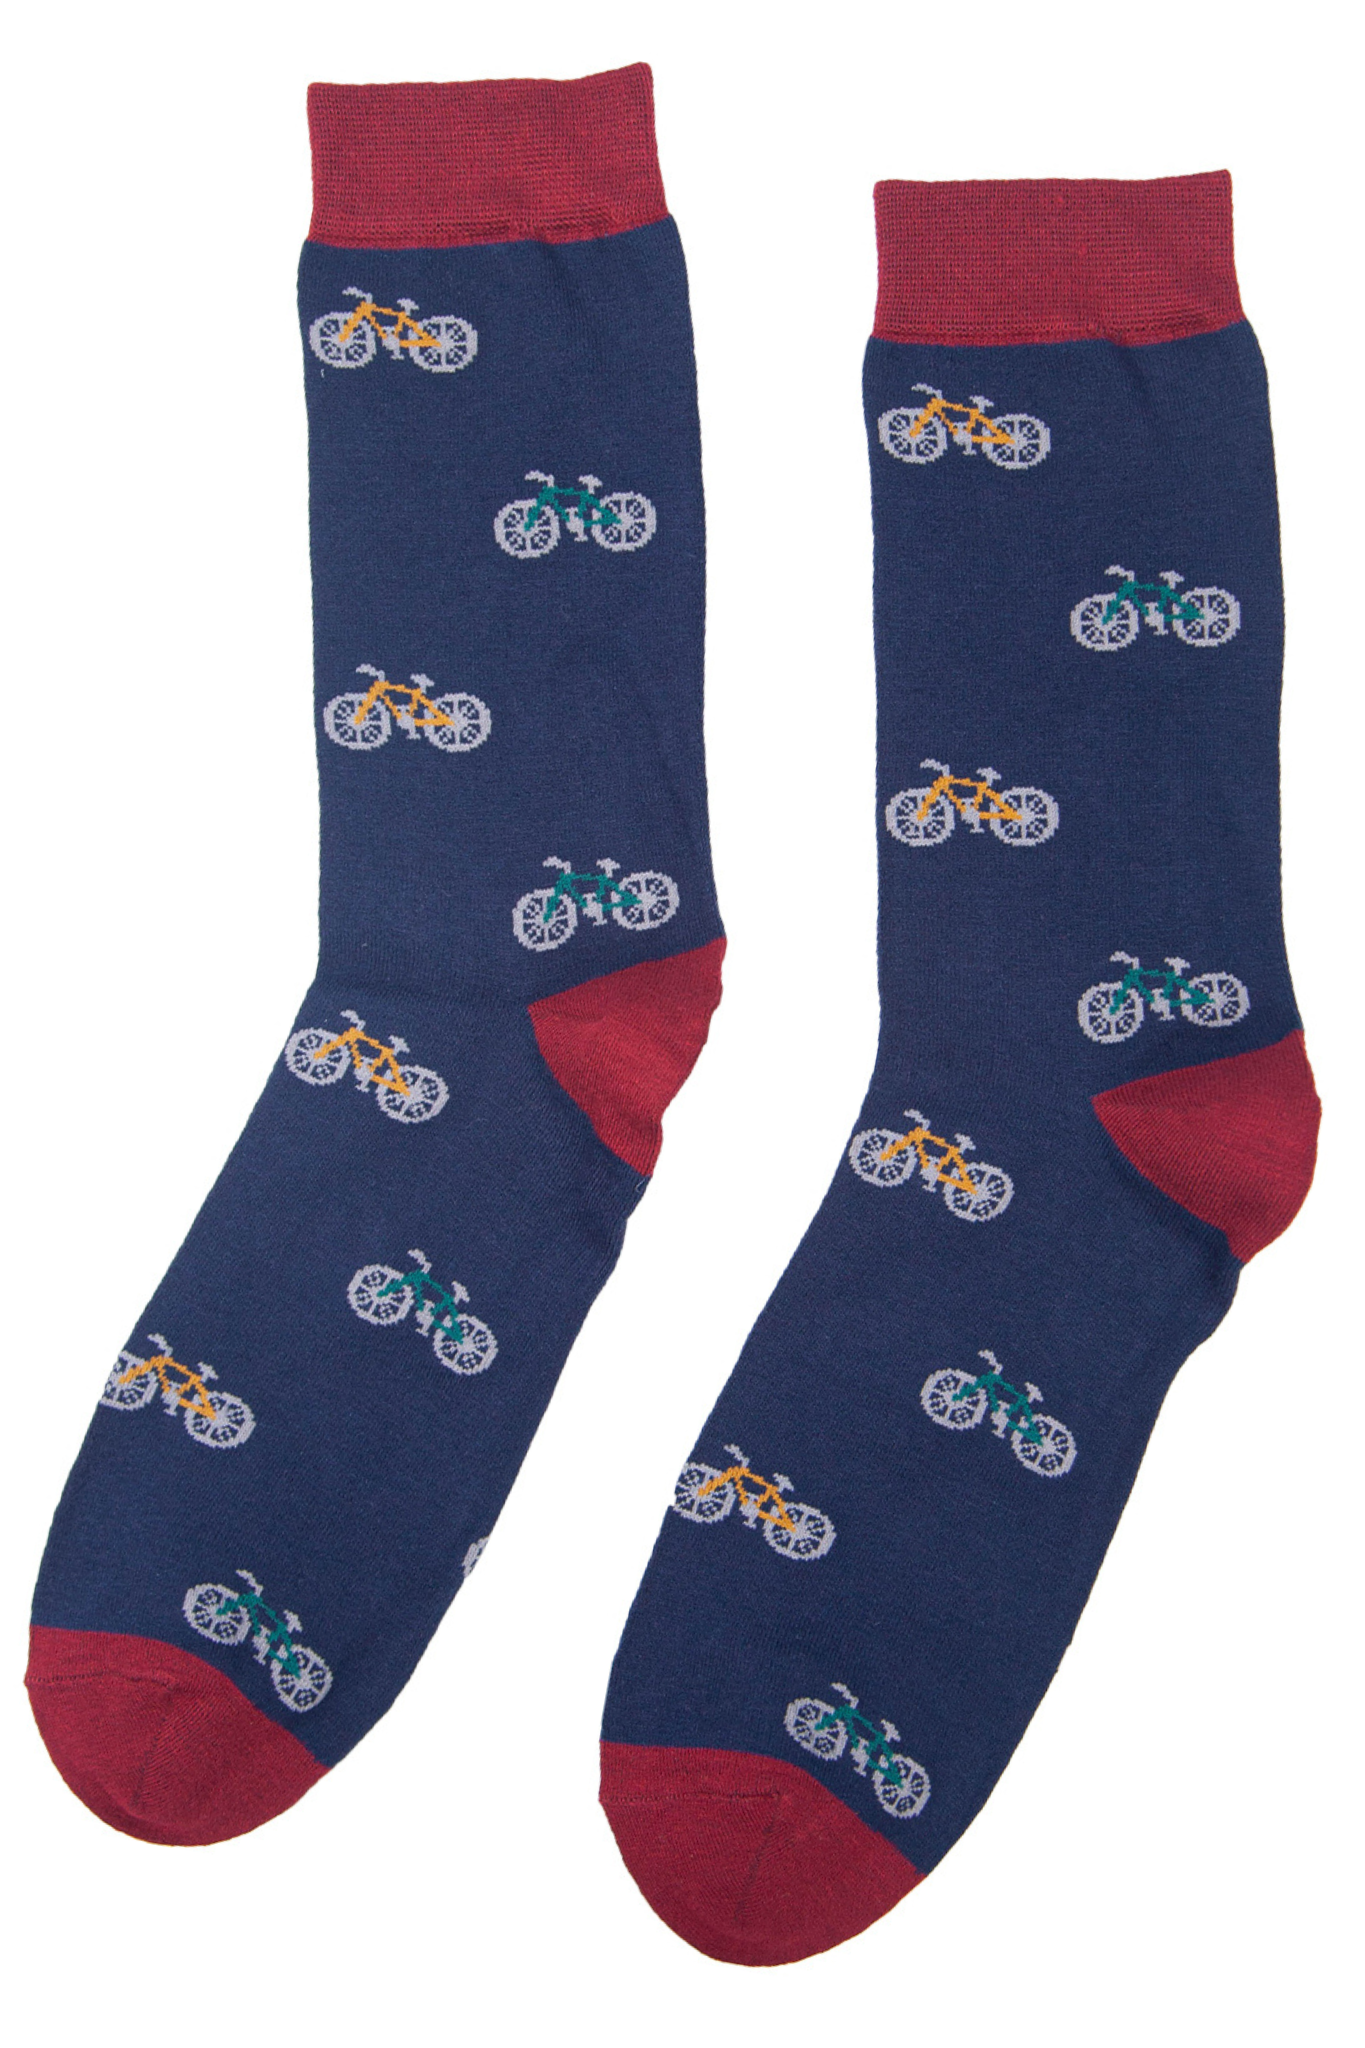 navy blue bamboo socks with an all over bicycle print